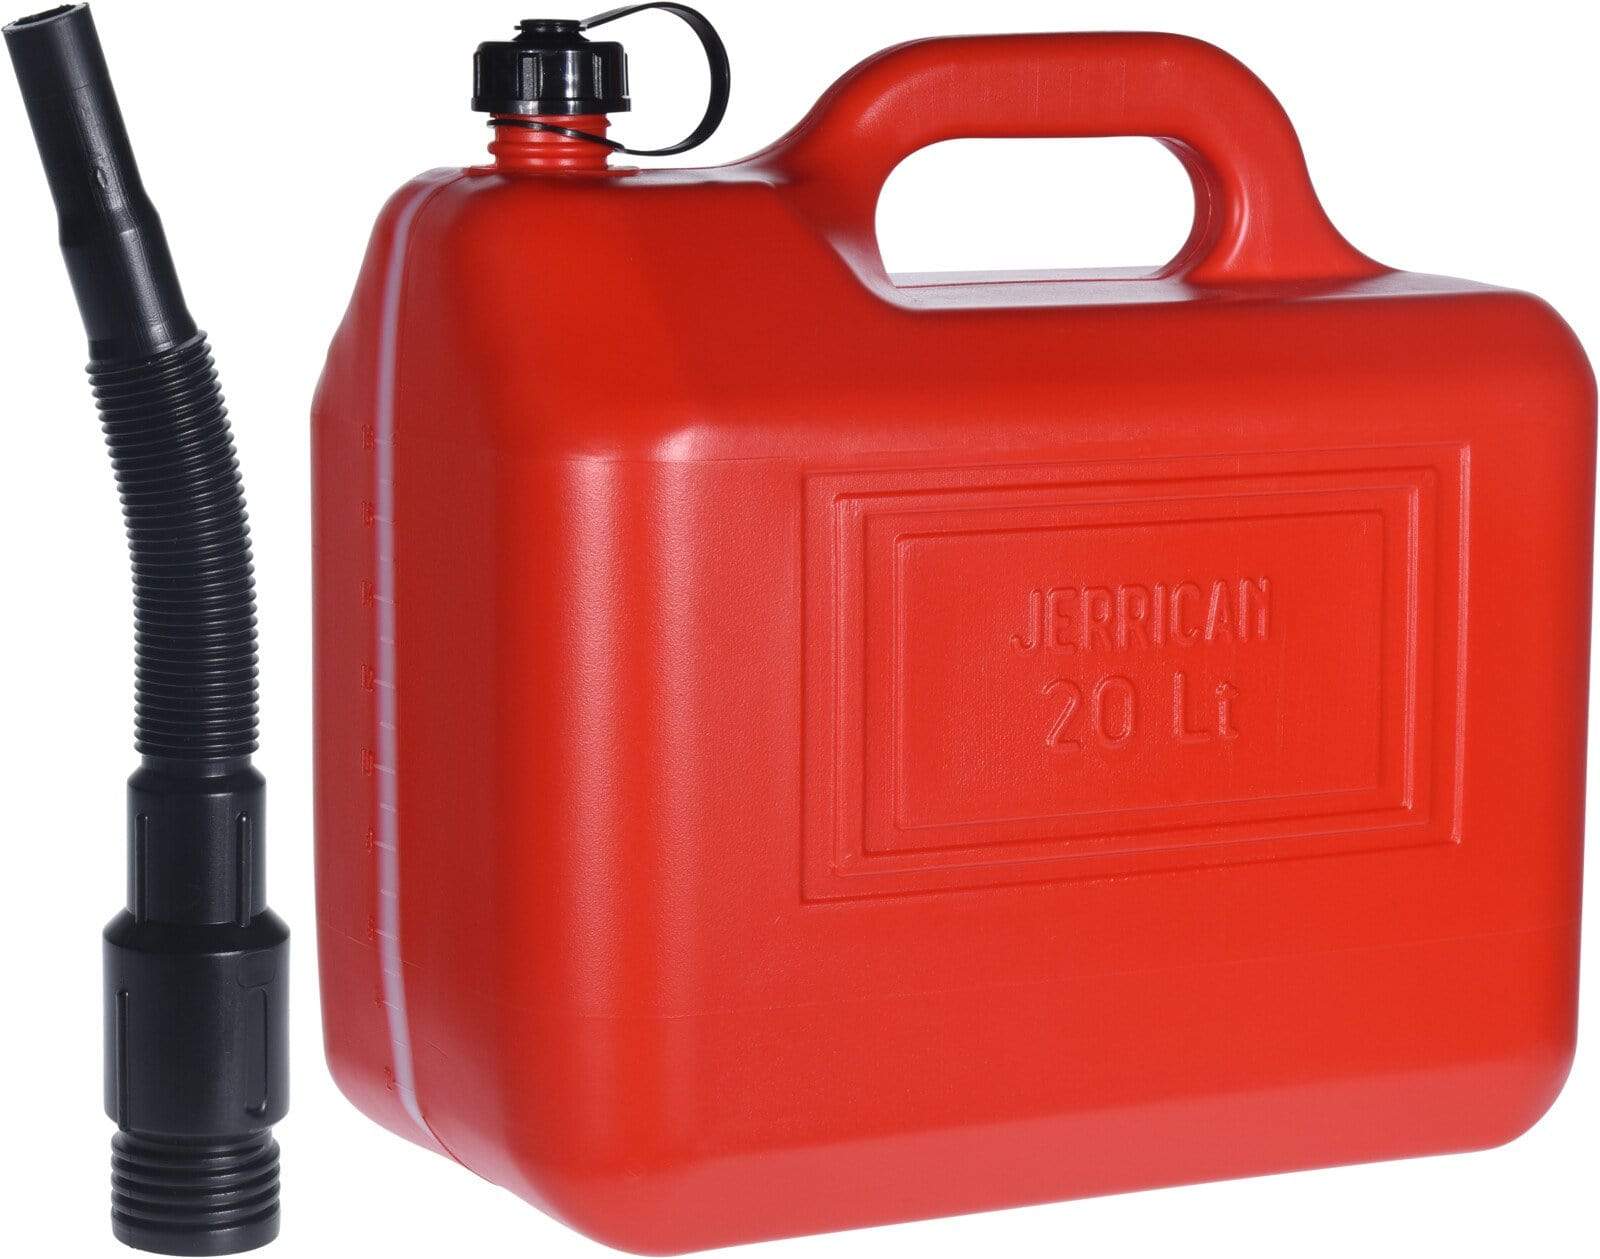 Jerrycan 20 liters with Fuel Funnel | Supply Master | Accra, Ghana Tools Building Steel Engineering Hardware tool